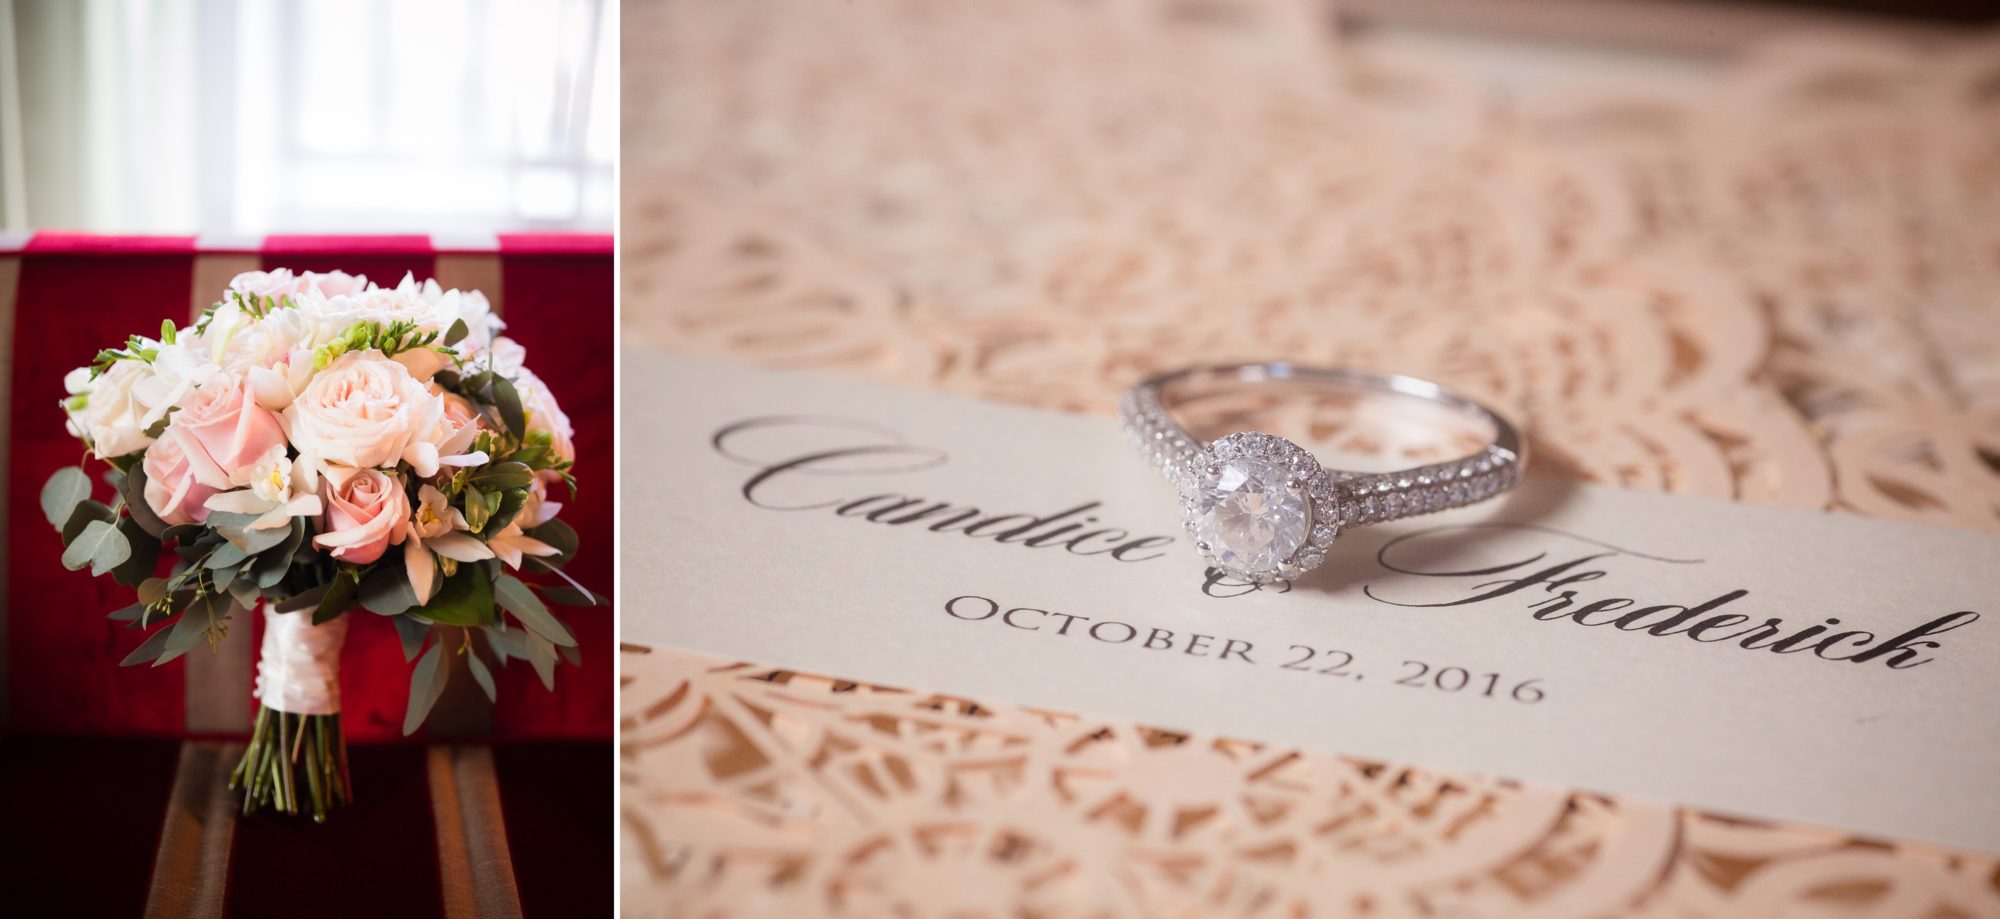 Details of the bride's engagement ring on top of the bride and grooms wedding invitations